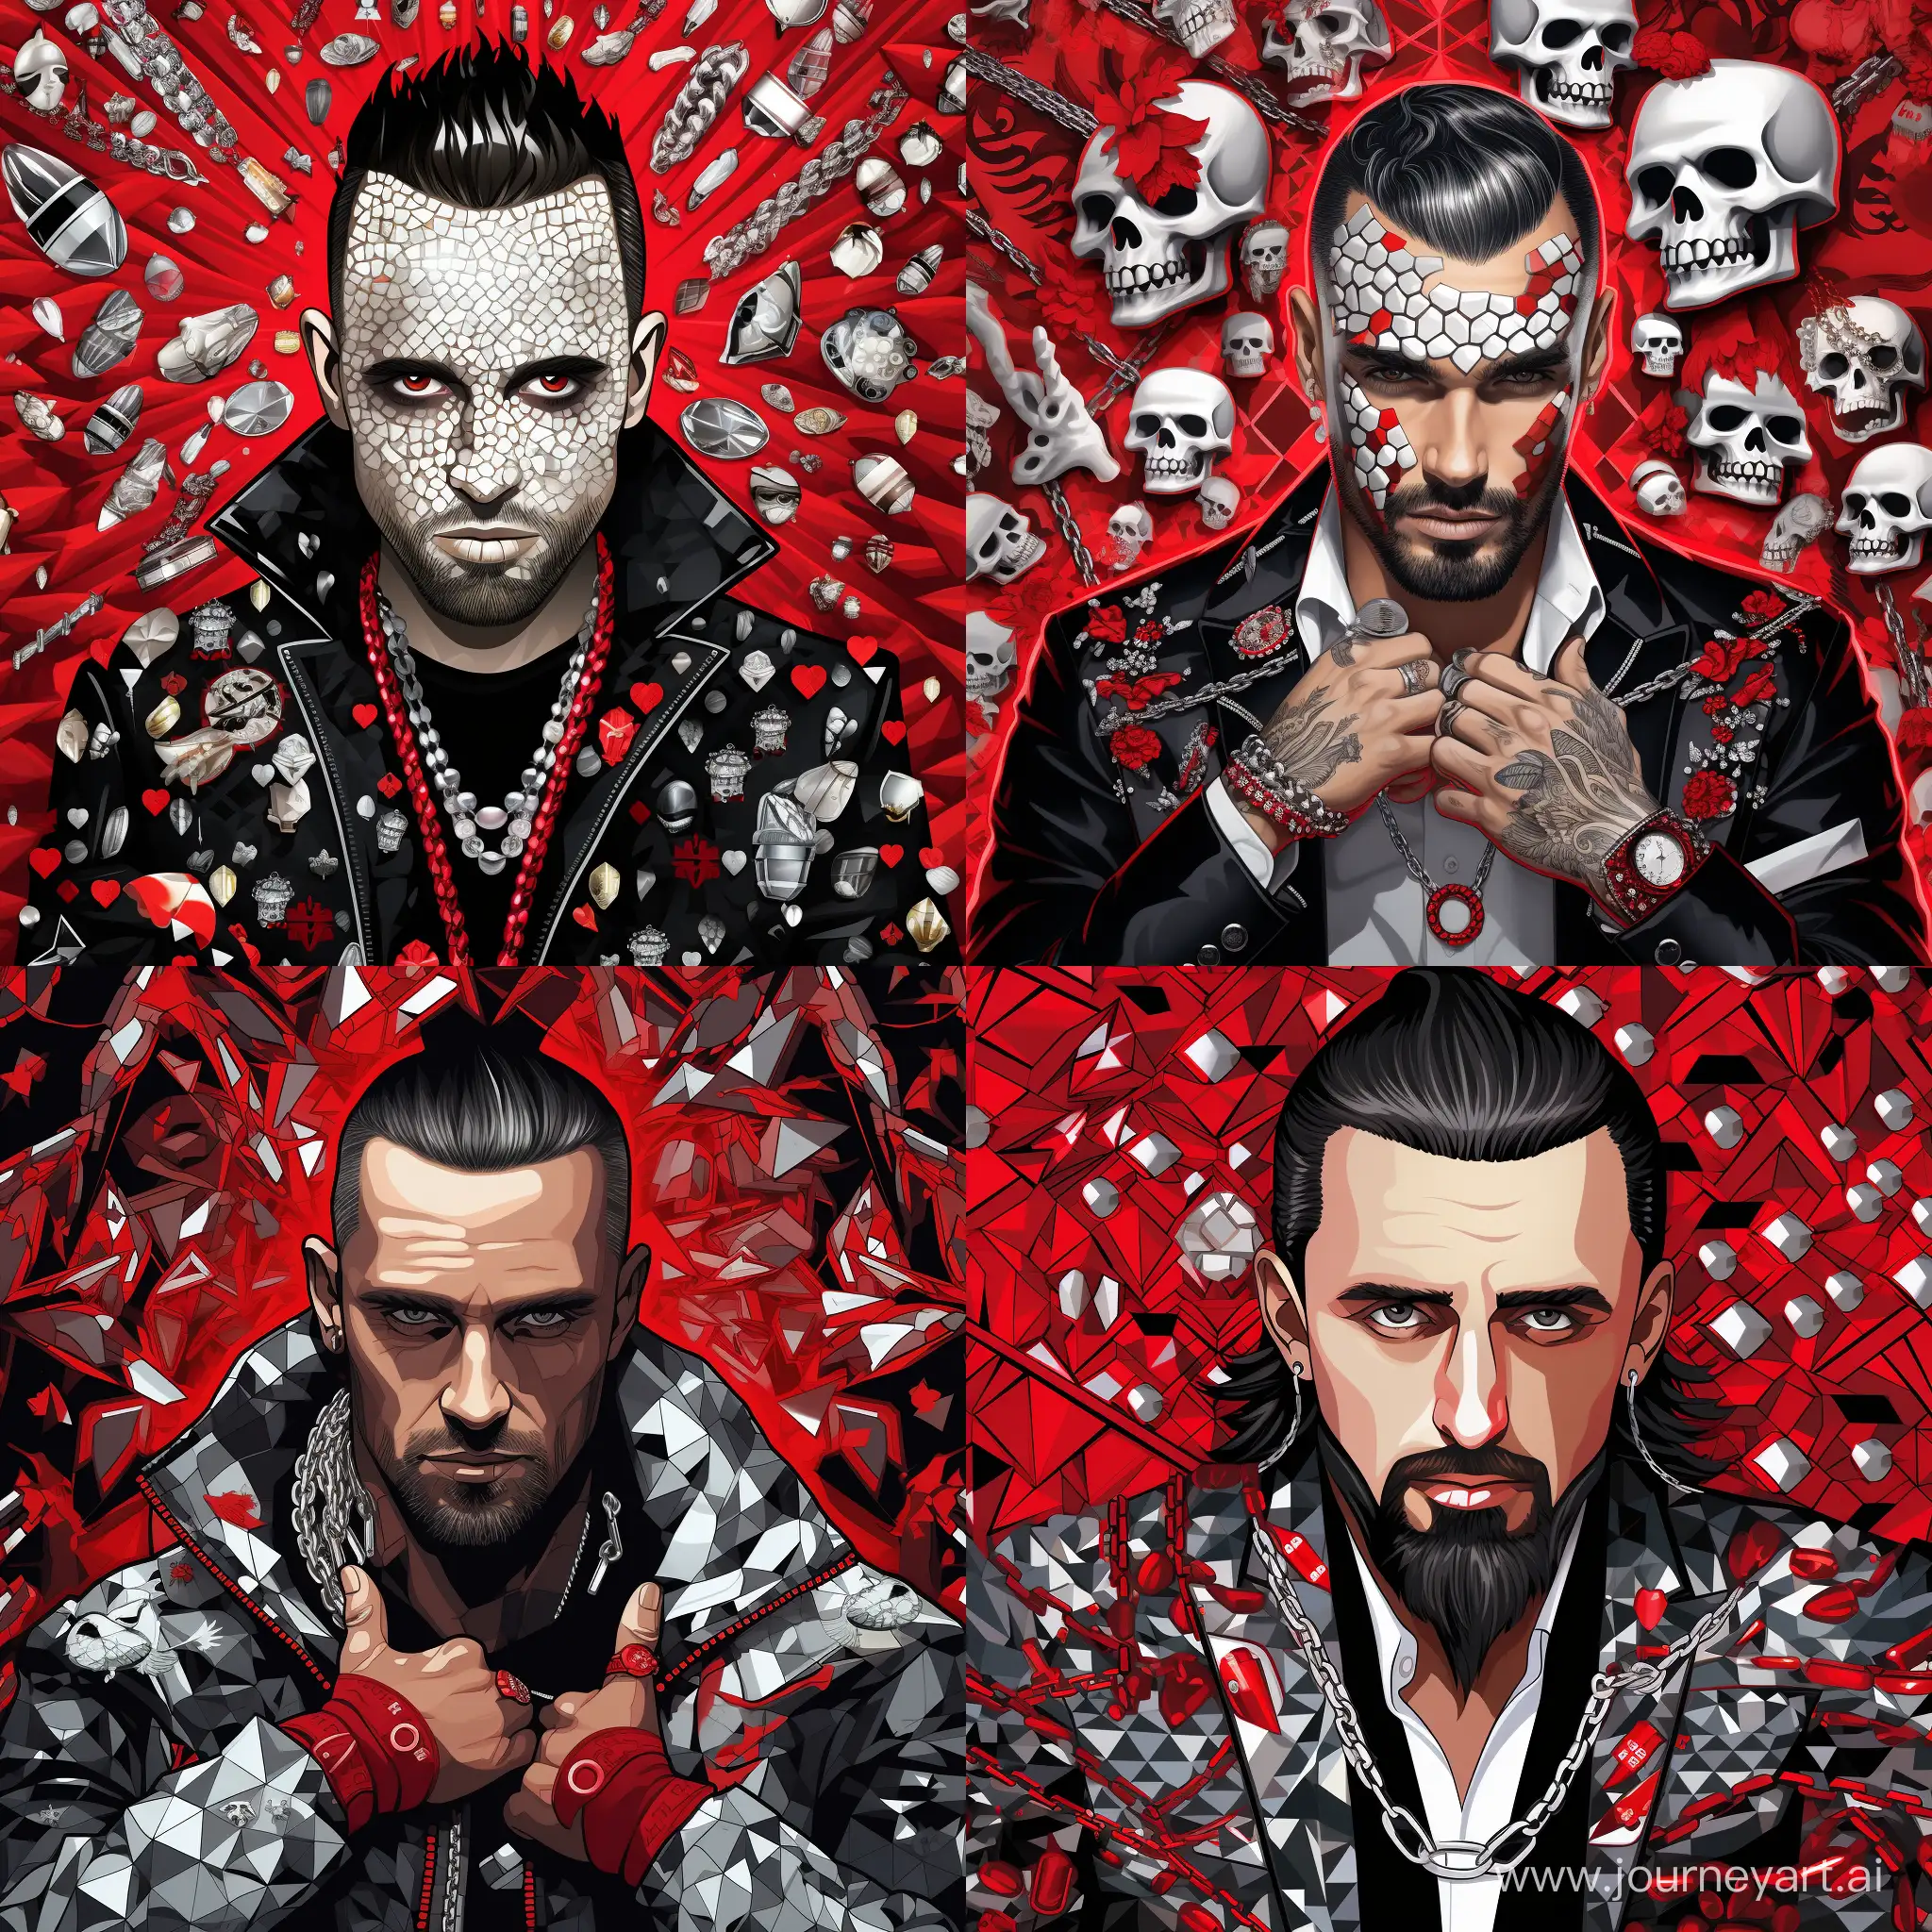 Portrait of Philippe Plein, many details, complex, on the background of a diamond pattern, accessories with a skull black, white, red, gray, caricature, cartoon style, pop art style, fashion illustration style